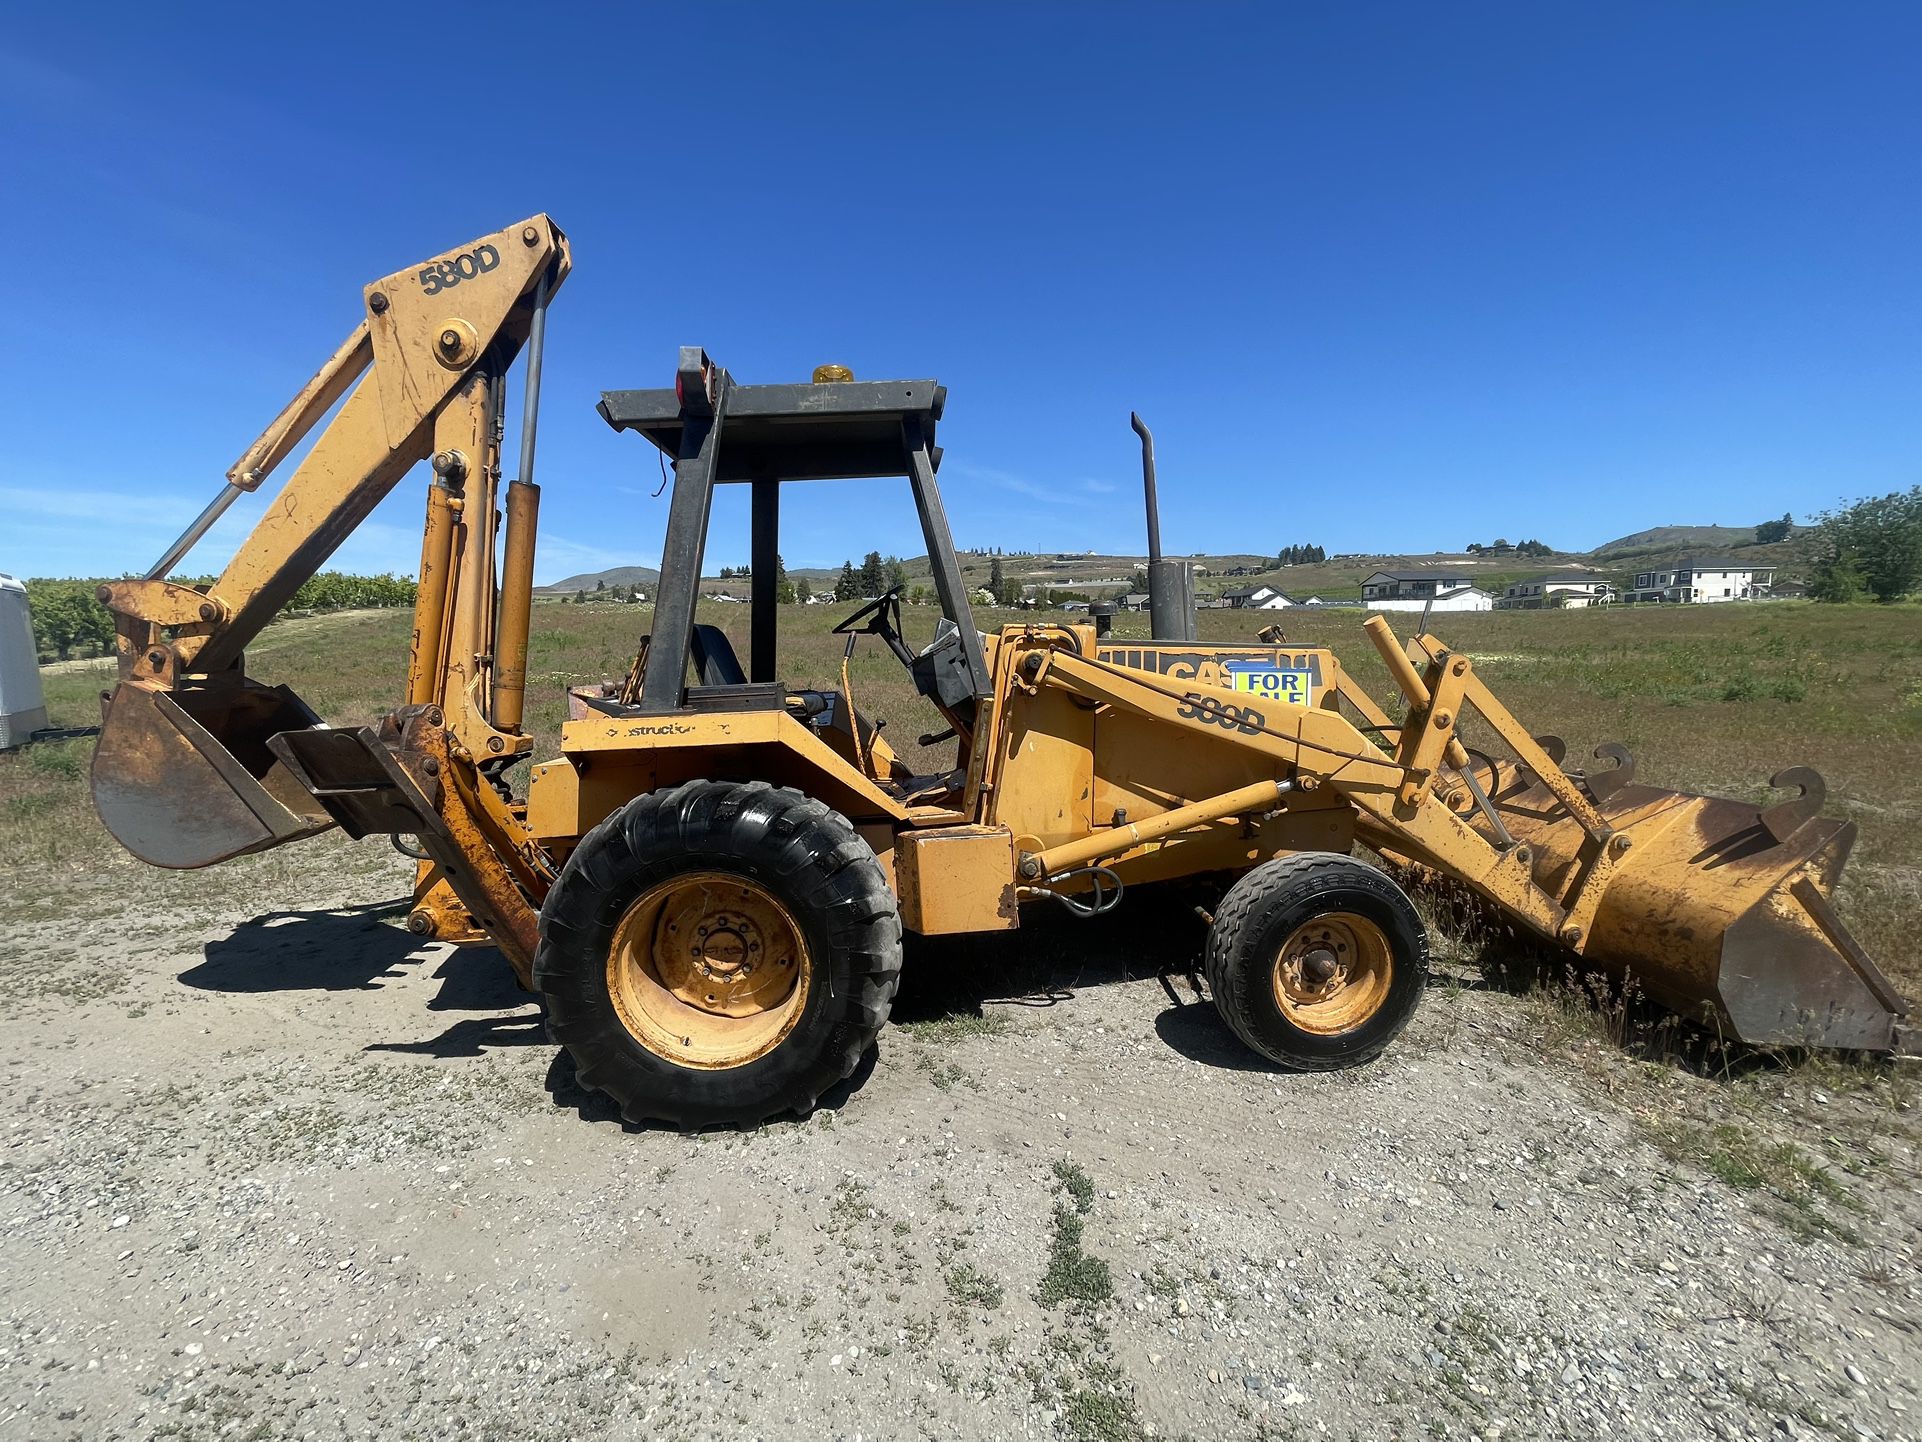 1978 Case Backhoe With Just 3427 Hours